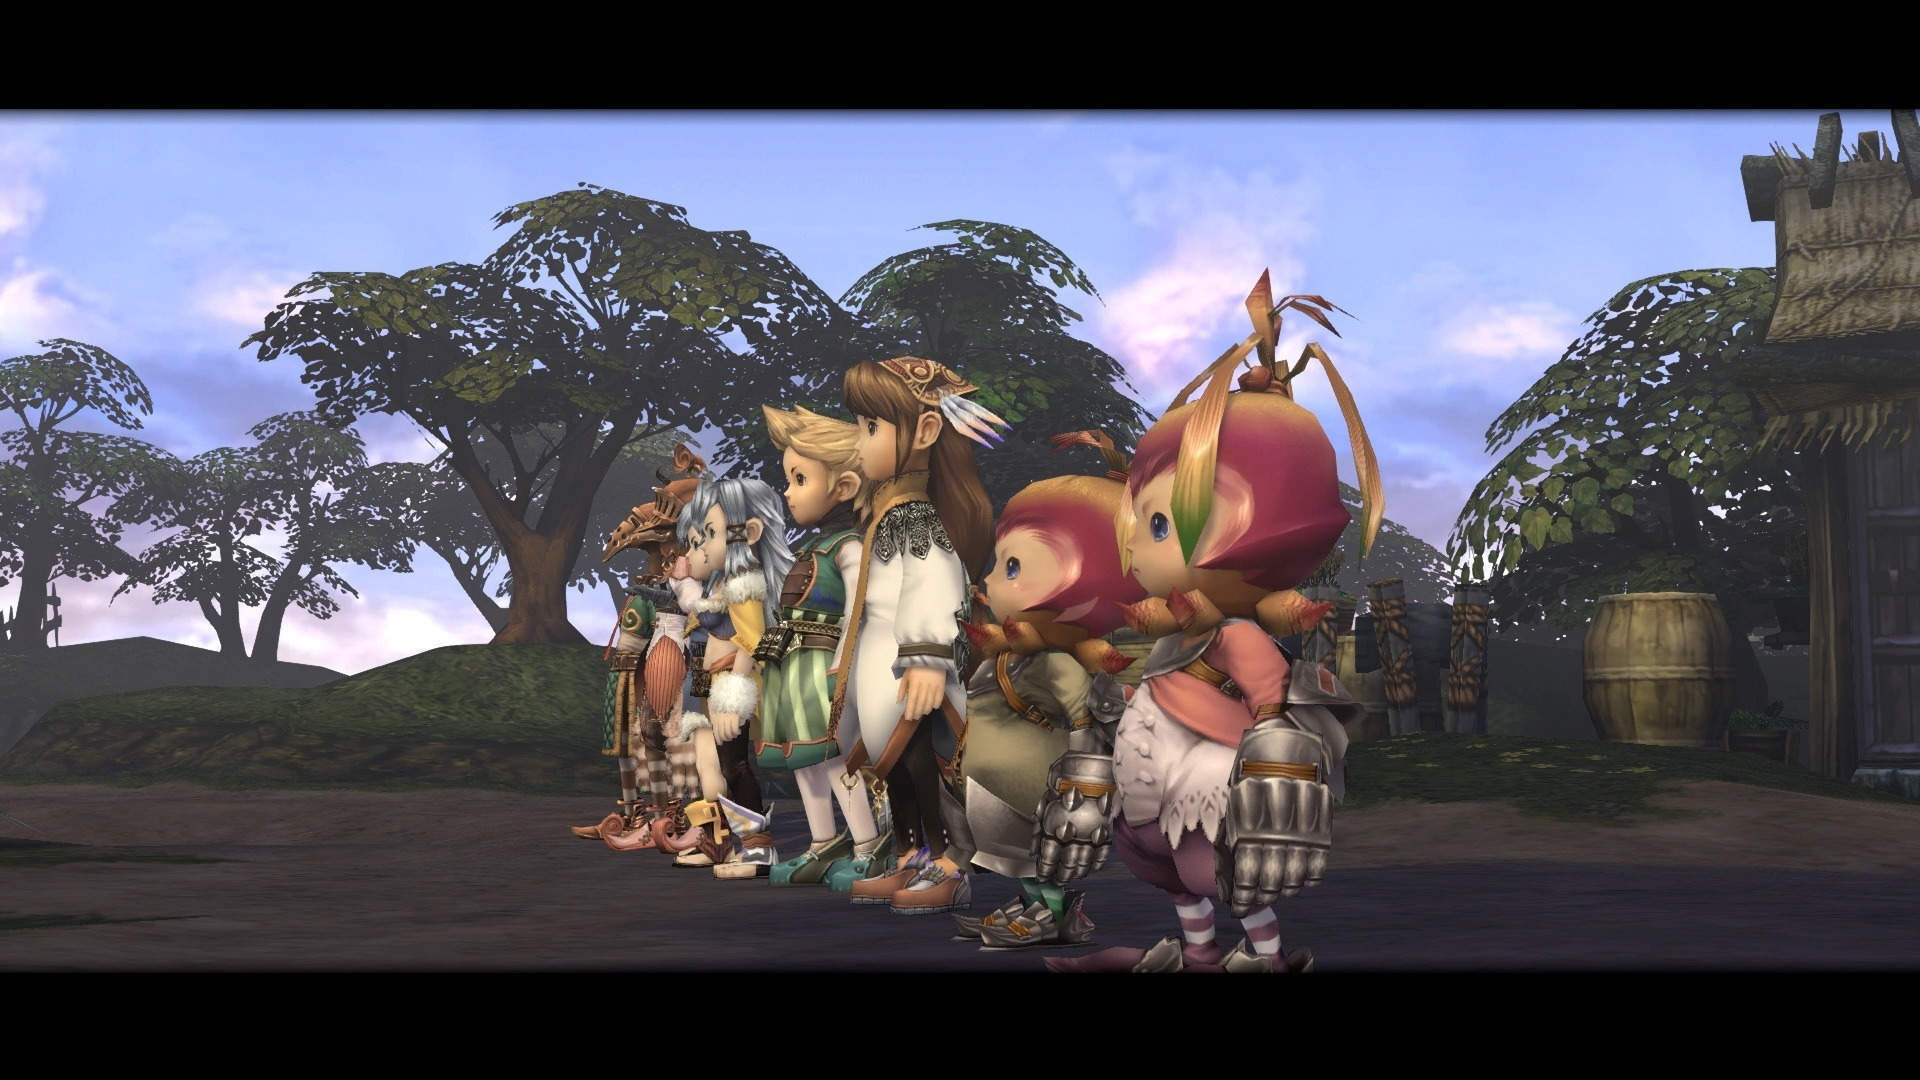 Final Fantasy Crystal Chronicles Remastered Edition launching August 27